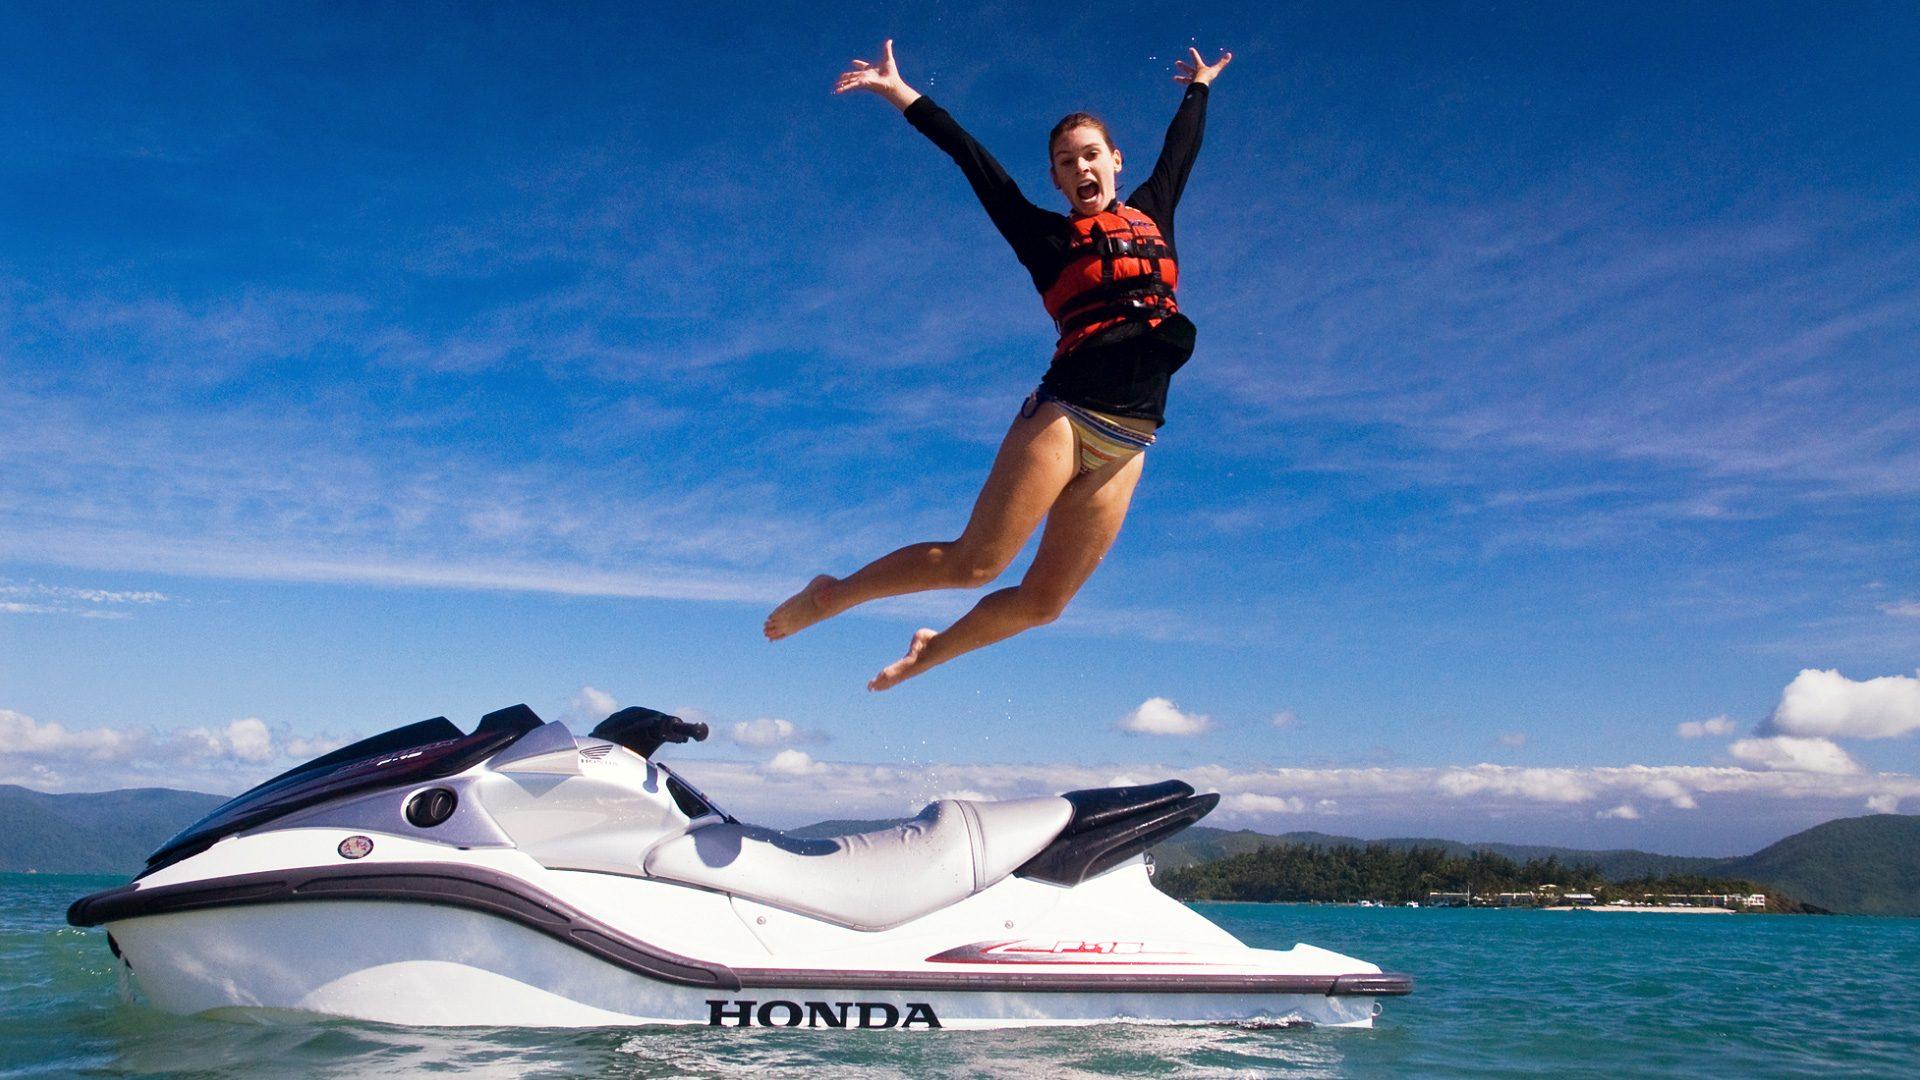 High Definition Wallpaper Of A Woman Jumping Out Of A Jetski